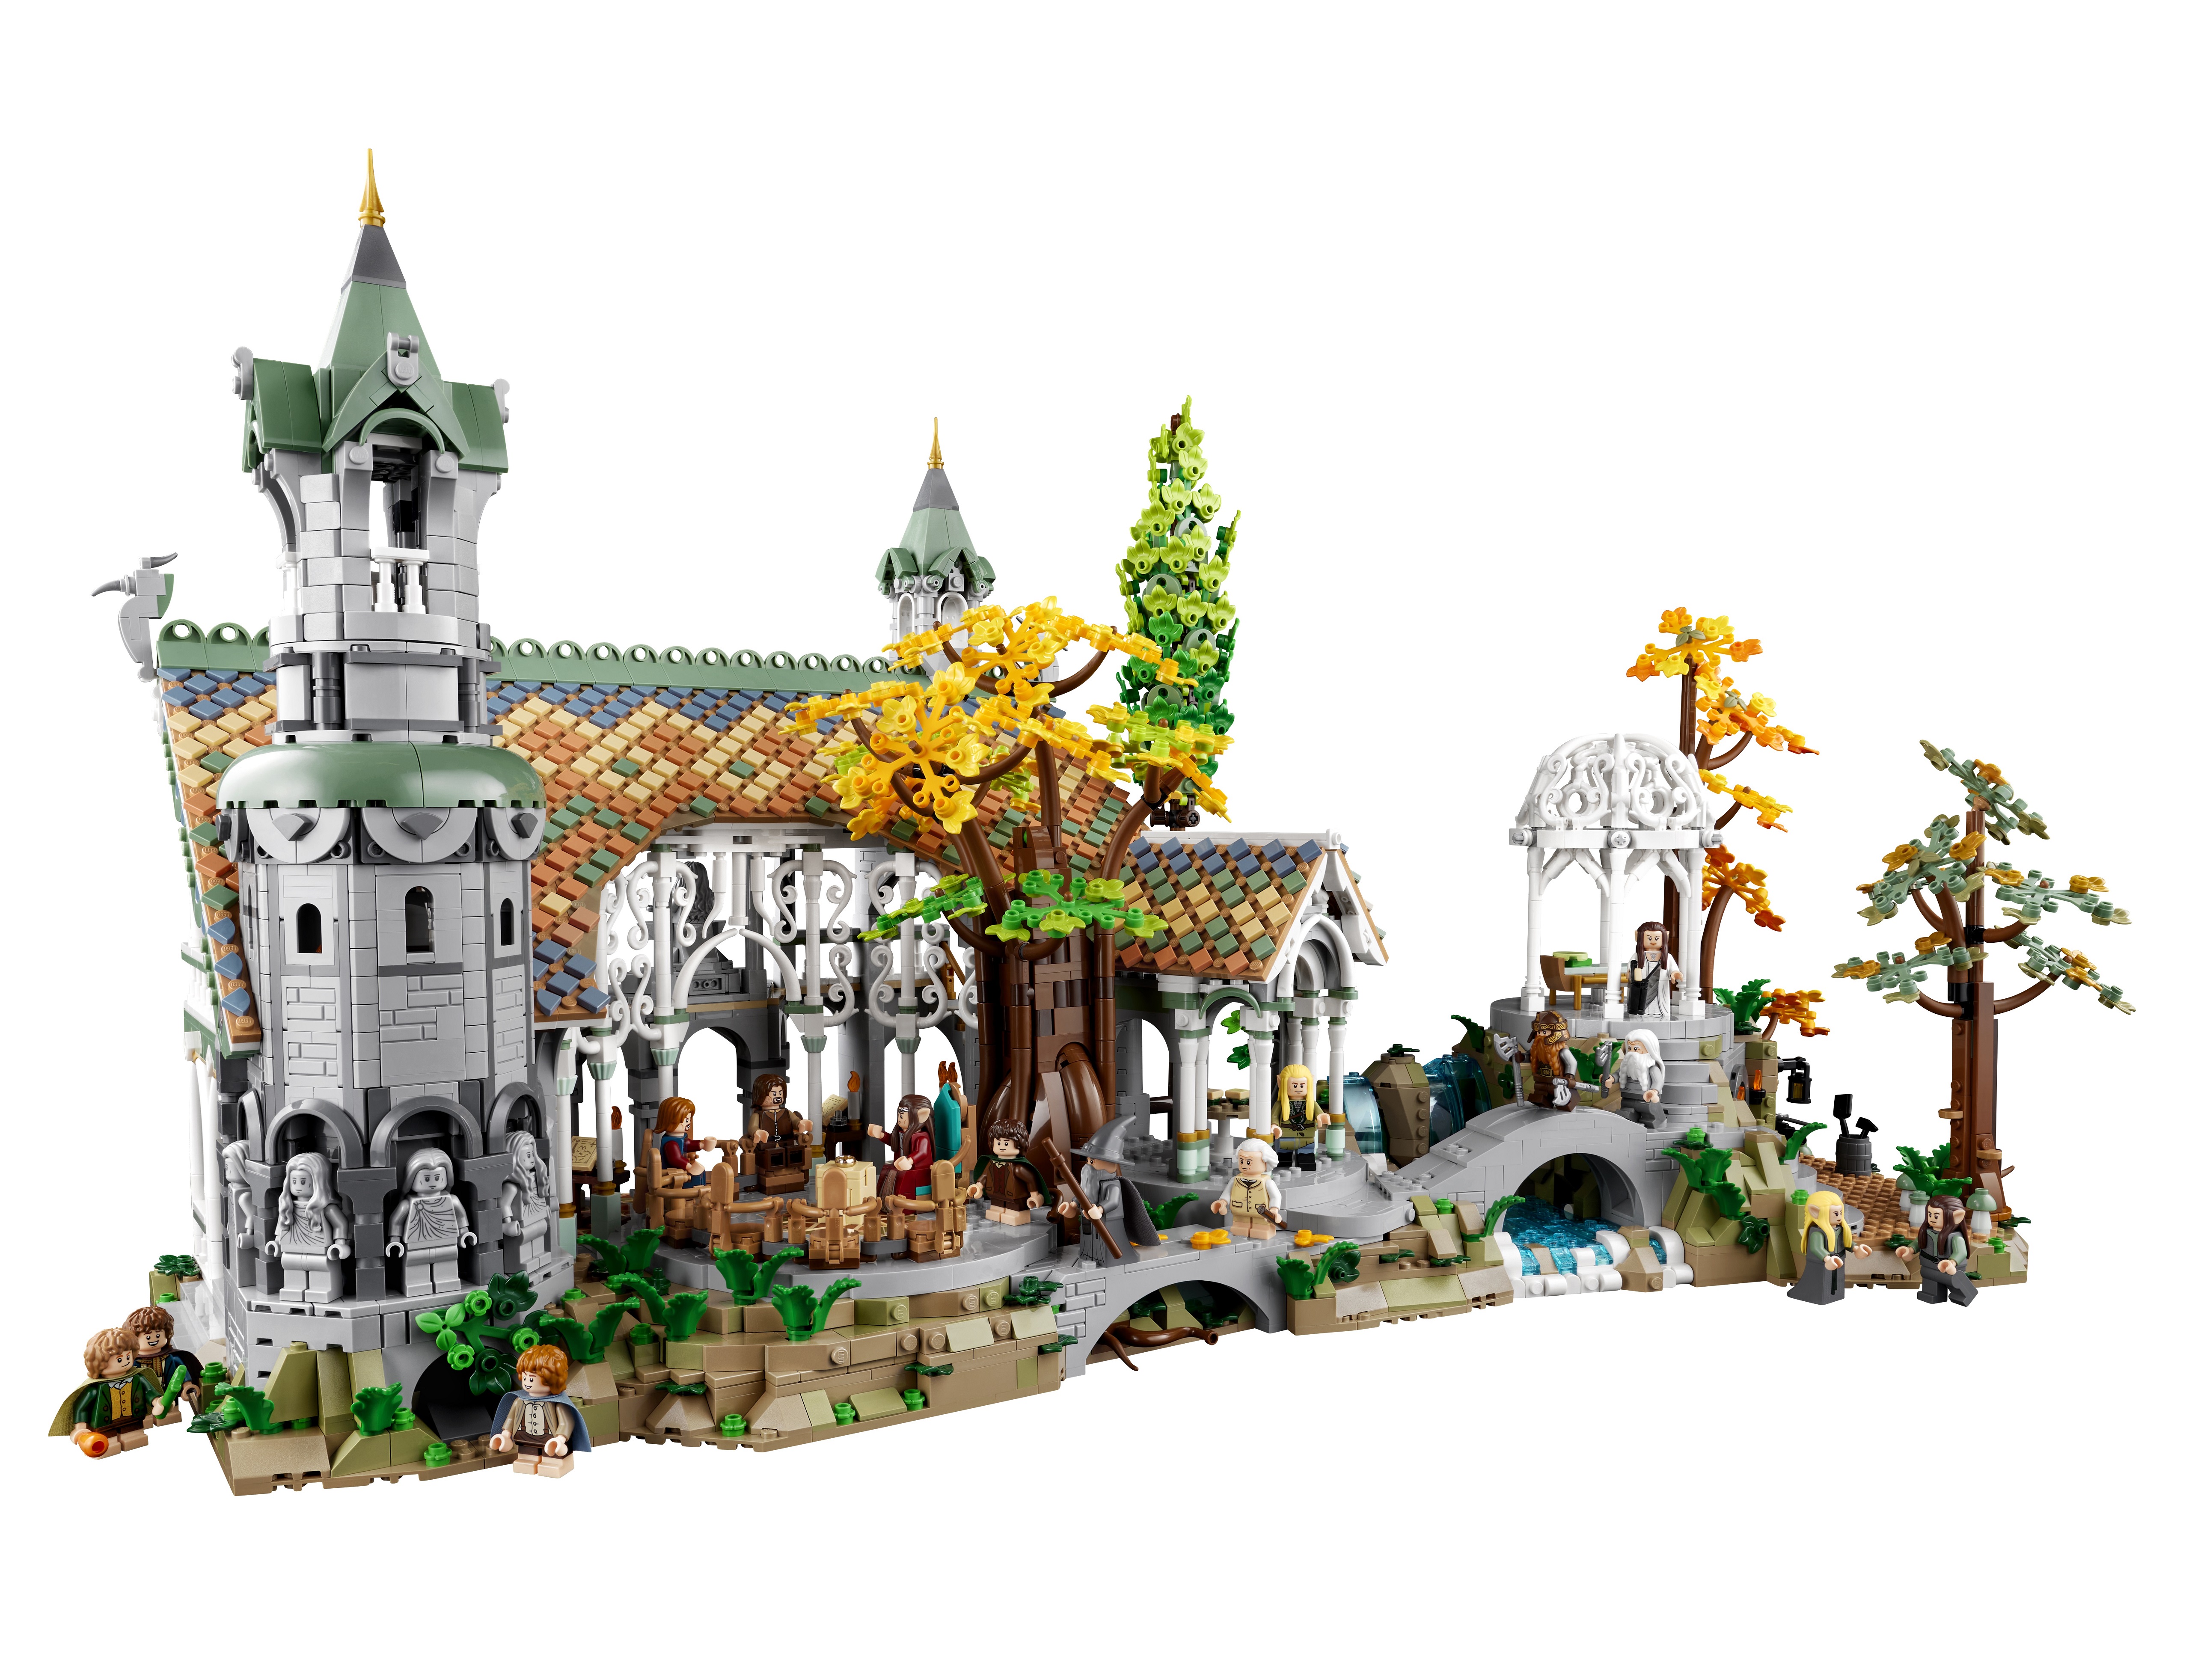 Fahrenheit Præfiks oprindelse The Top 10 biggest LEGO sets list welcomes 10316 Lord of the Rings:  Rivendell - Jay's Brick Blog